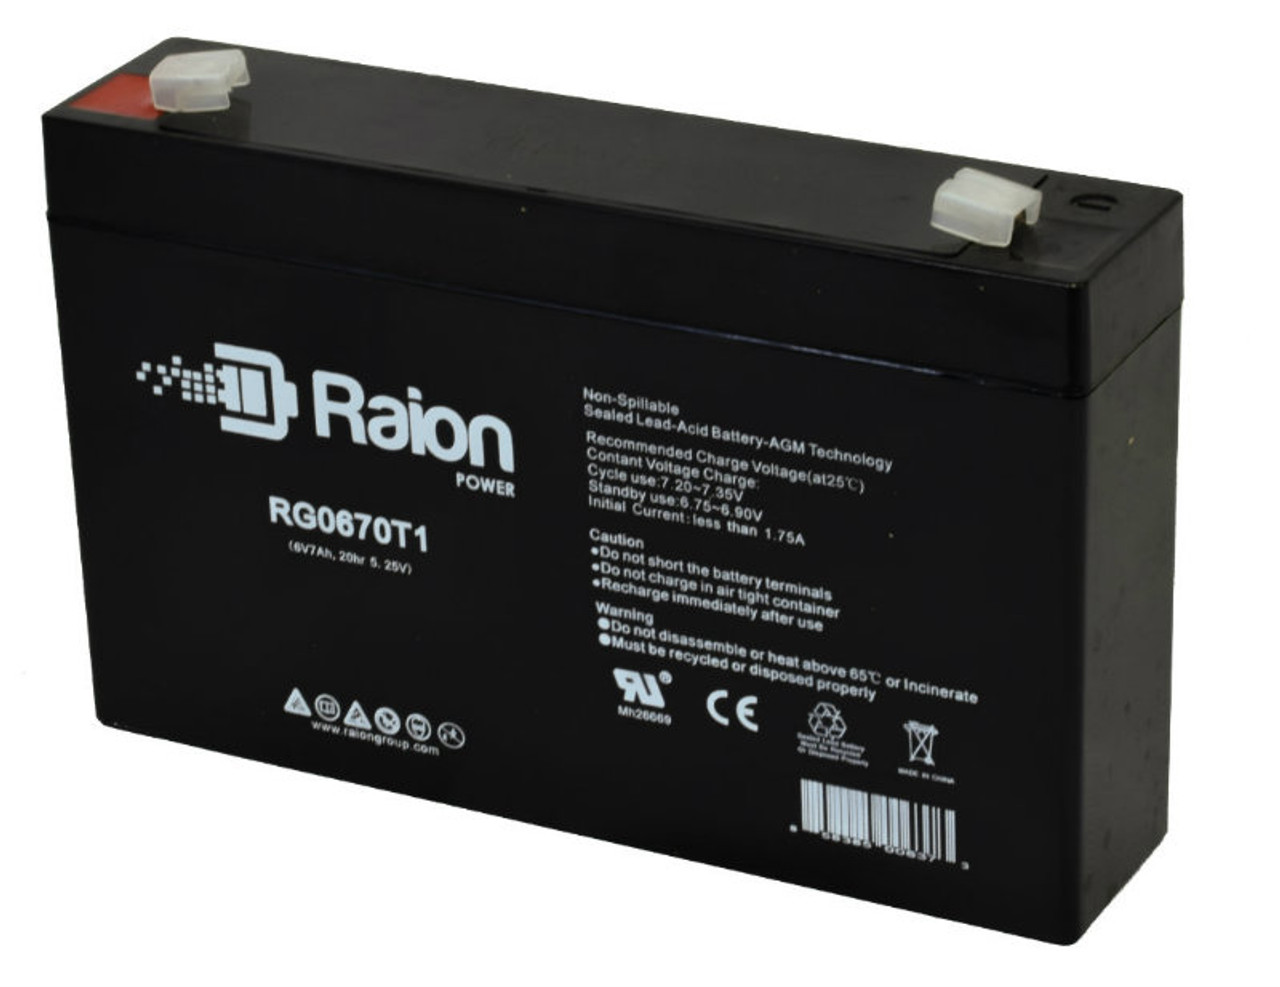 Raion Power RG0670T1 Replacement Battery for Power Energy DC6-7.2 OEM Battery